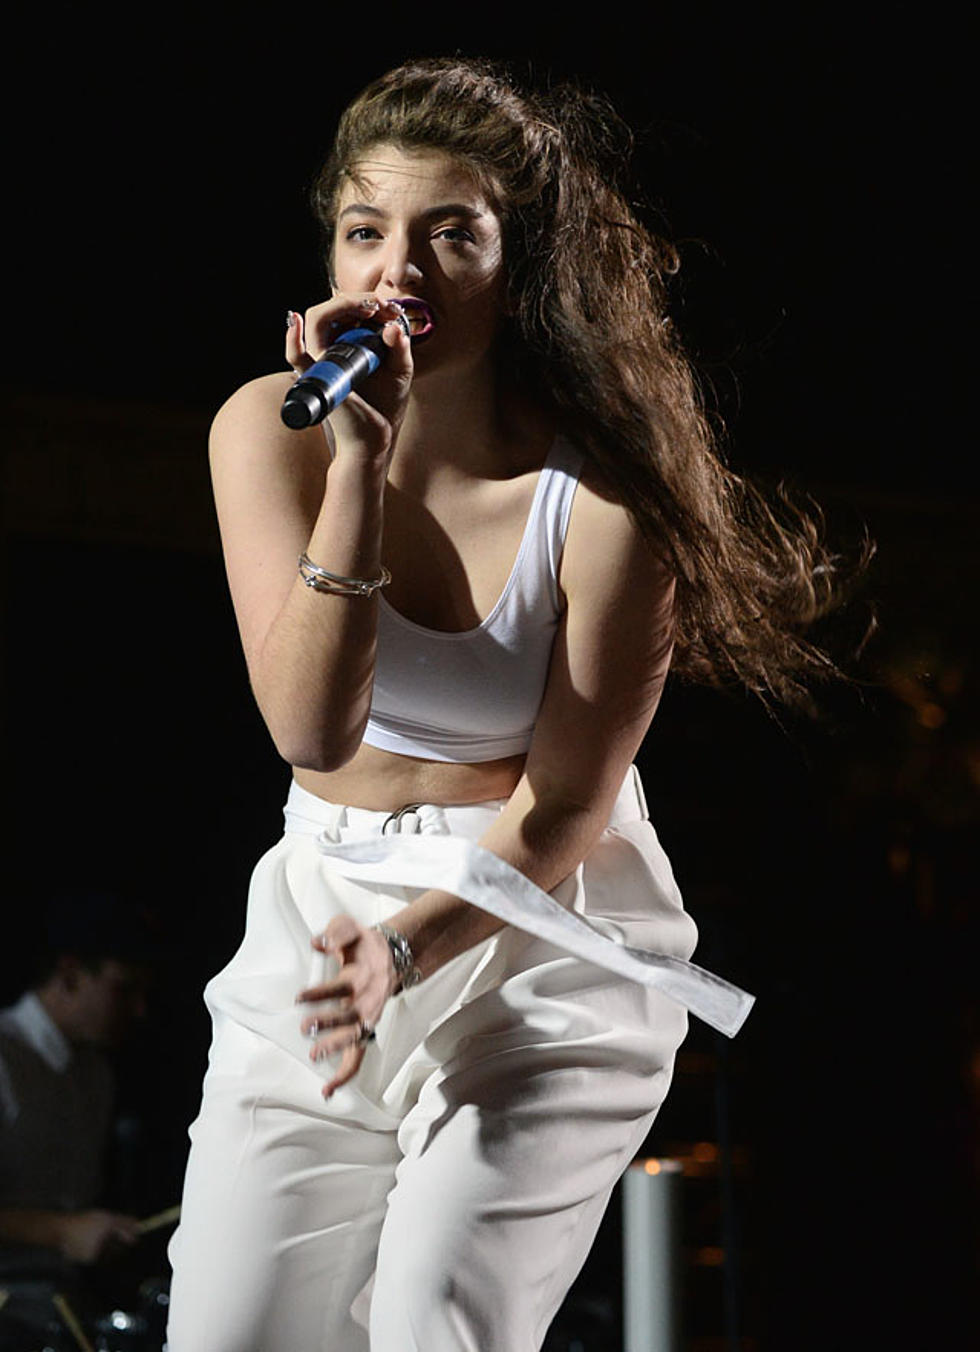 Oh Lorde, Singer Coming to Council Bluffs in the Fall!